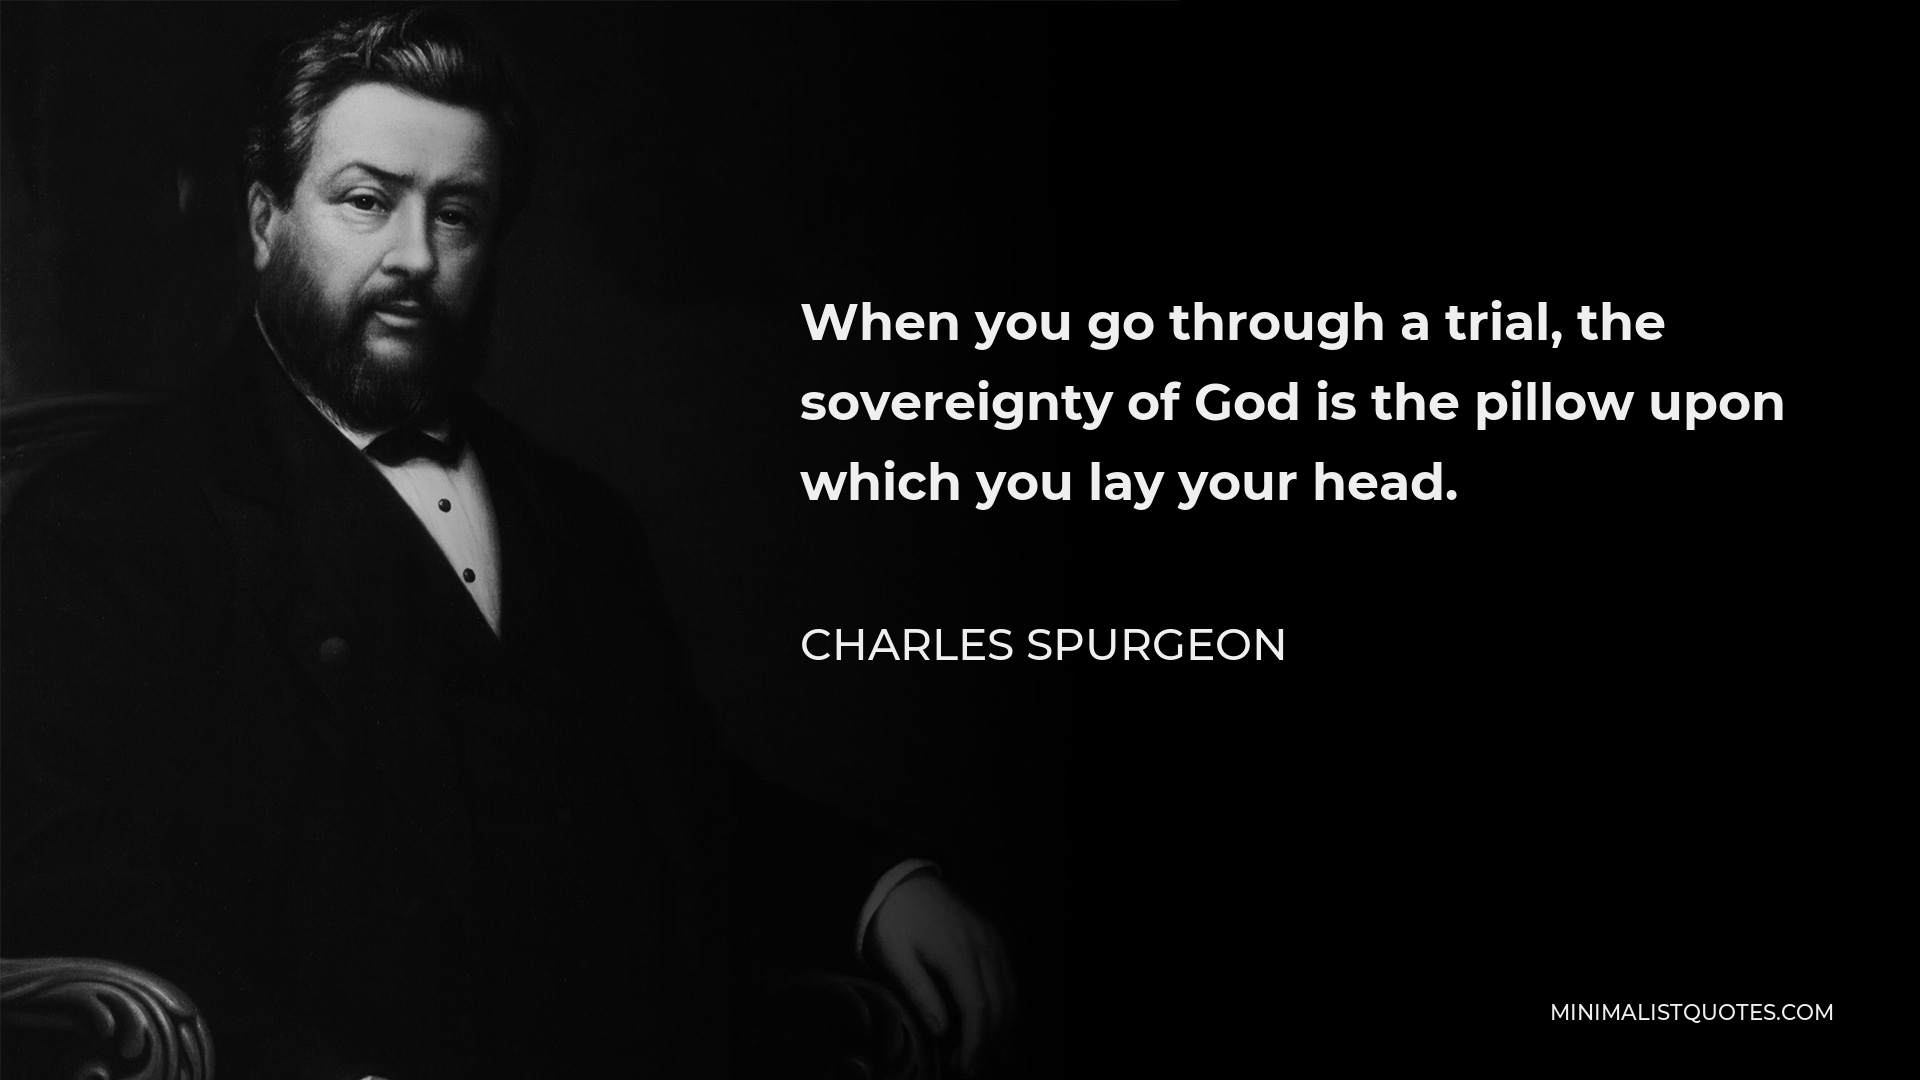 Charles Spurgeon Quote - When you go through a trial, the sovereignty of God is the pillow upon which you lay your head.